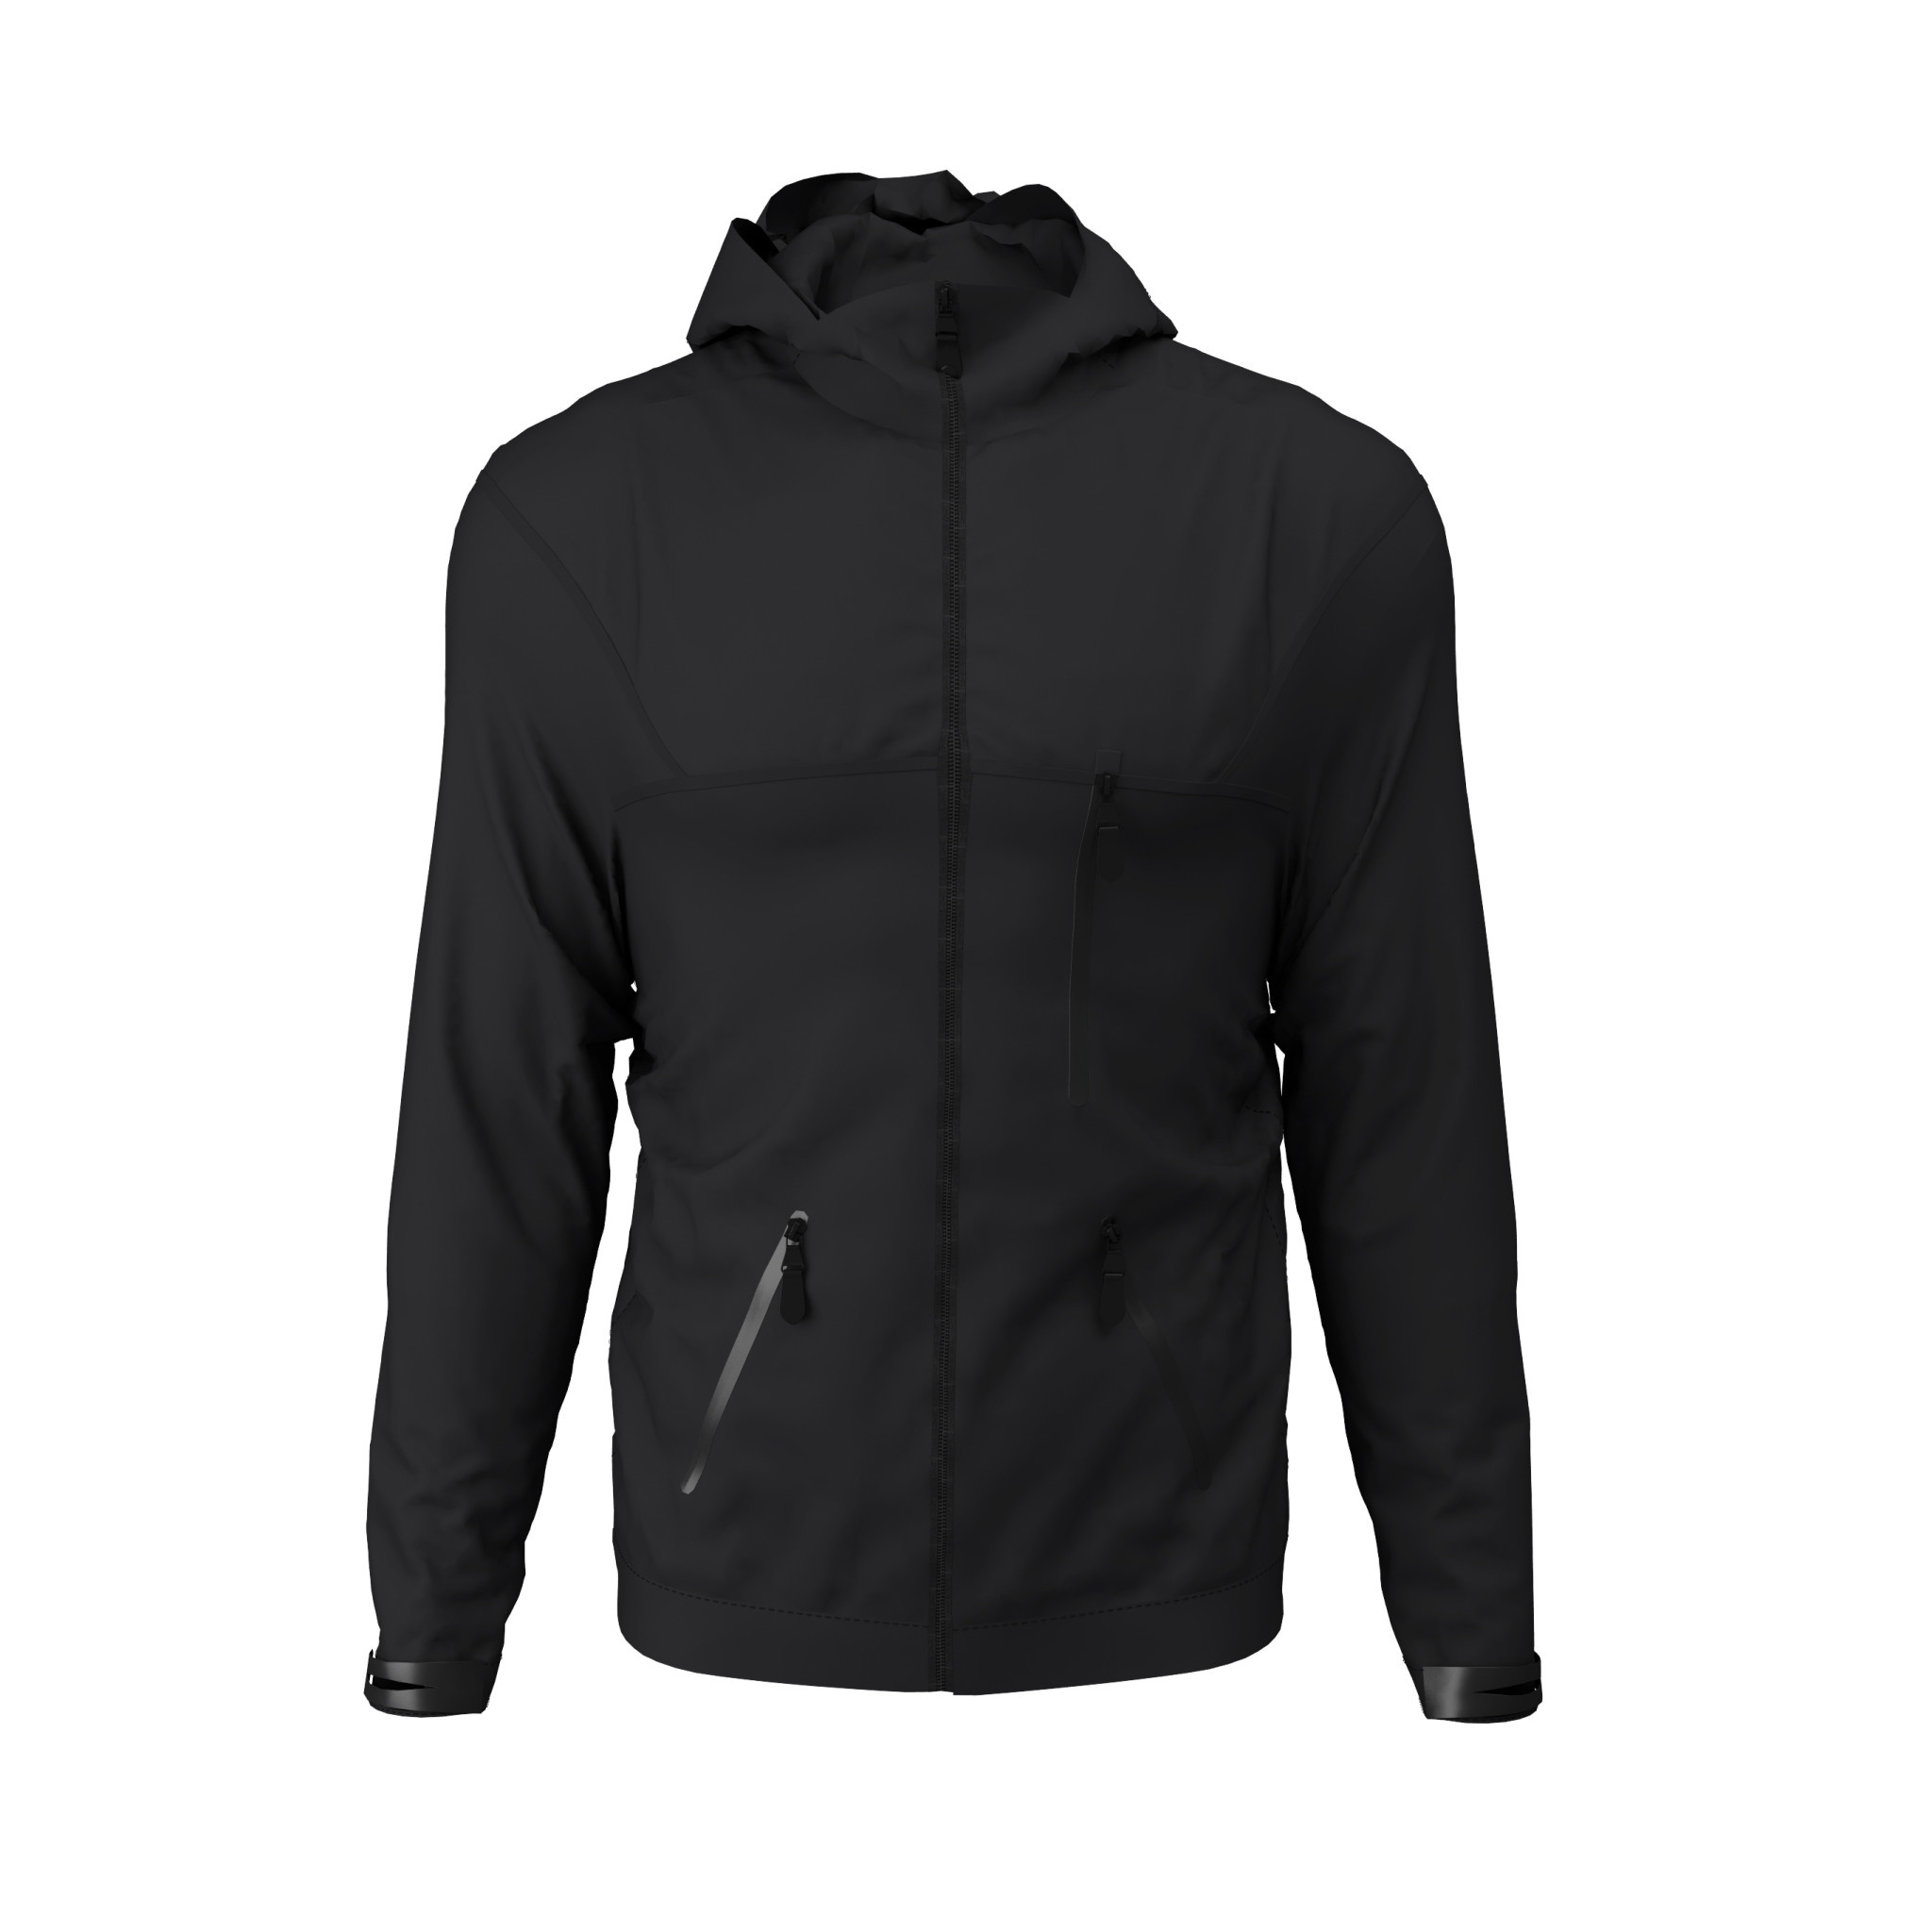 Adults Technical Jacket